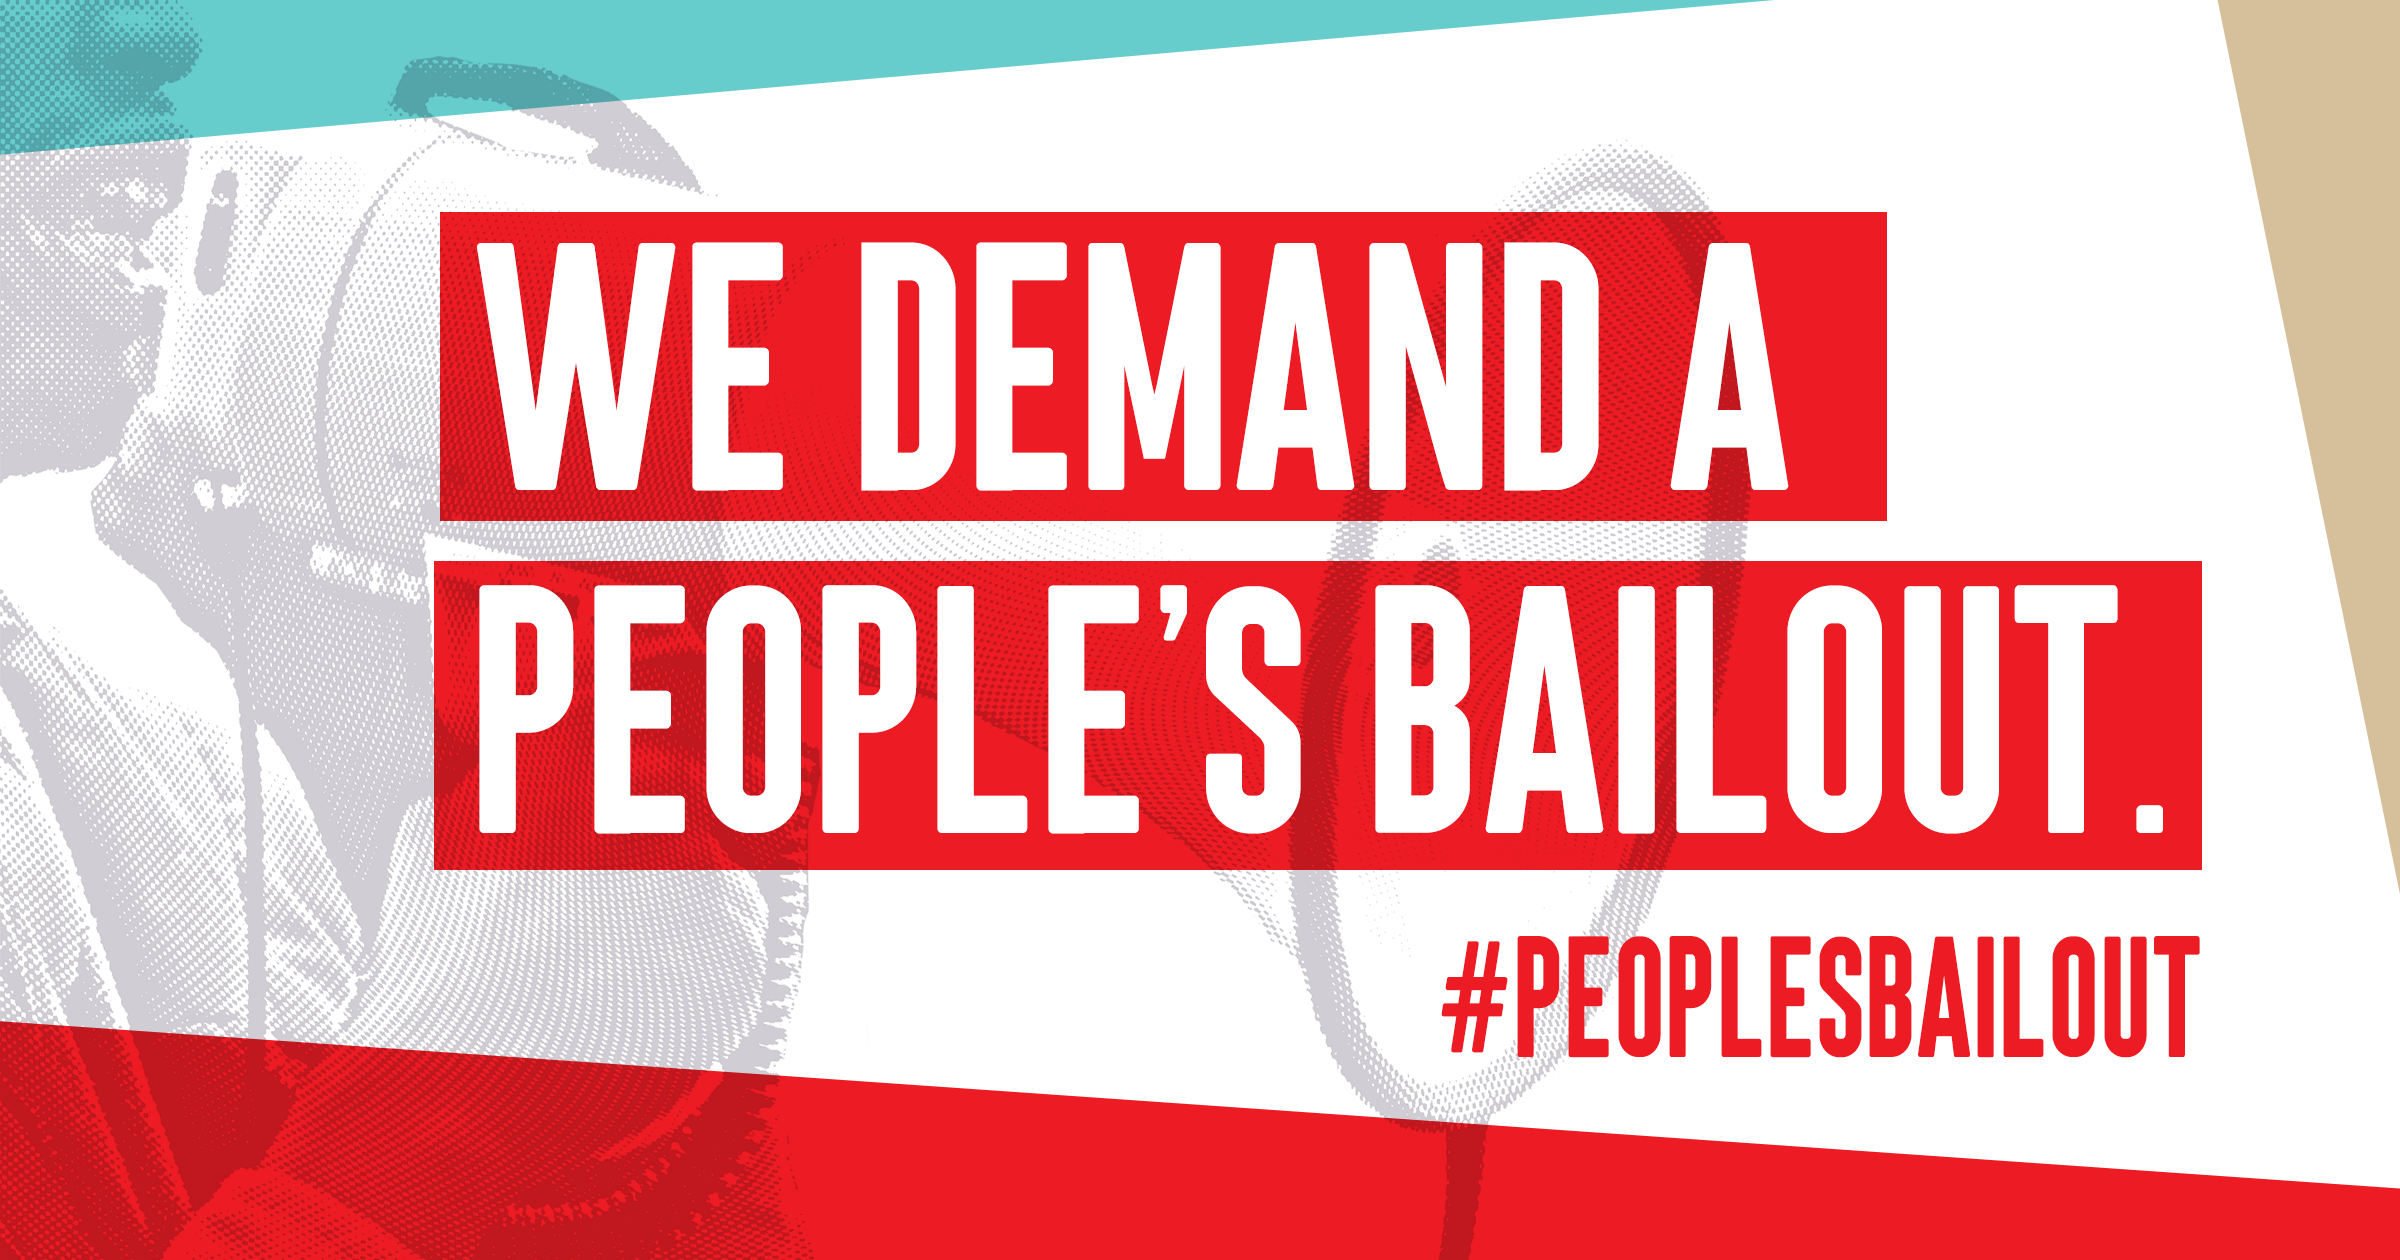 People's Bailout